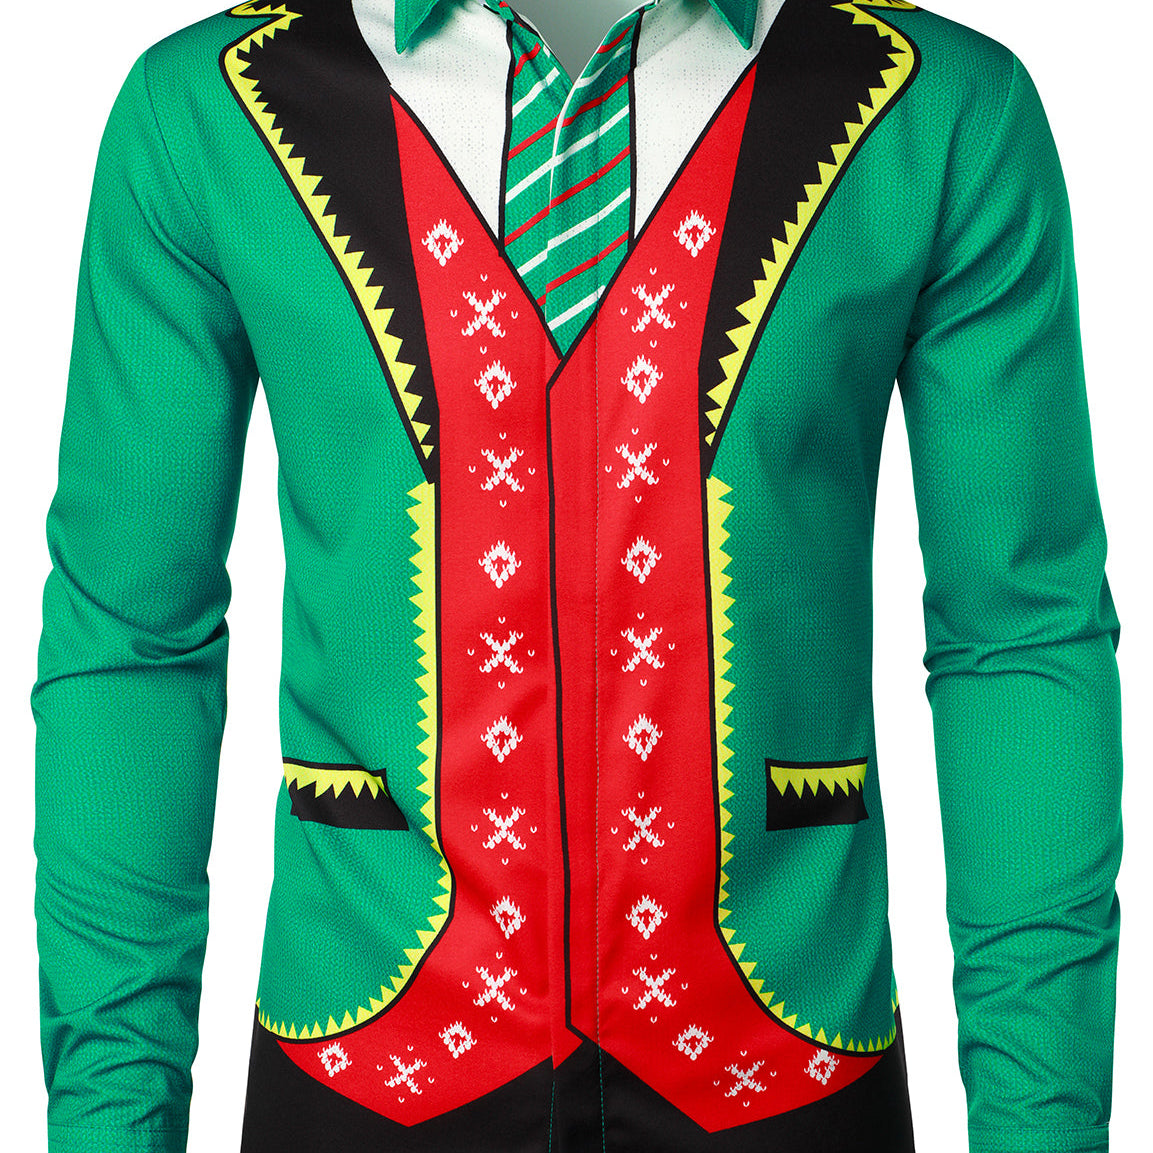 Men's Casual Christmas Outfit Themed Button Up Green Long Sleeve Shirt